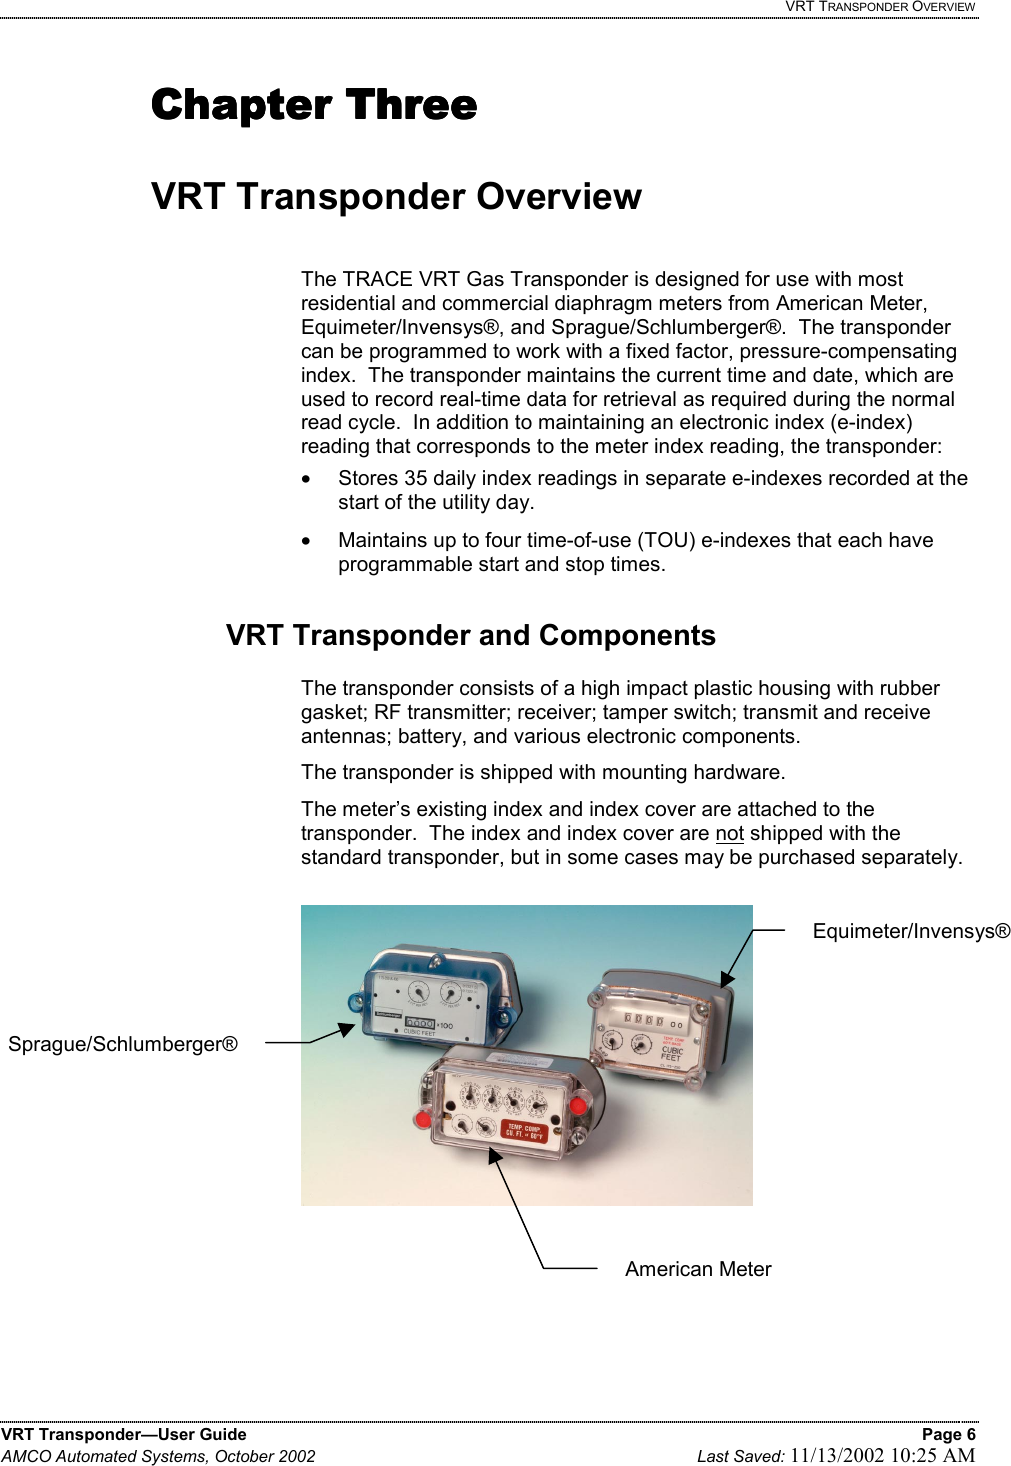   VRT TRANSPONDER OVERVIEW VRT Transponder—User Guide    Page 6 AMCO Automated Systems, October 2002    Last Saved: 11/13/2002 10:25 AM   Chapter ThreeChapter ThreeChapter ThreeChapter Three     VRT Transponder Overview  The TRACE VRT Gas Transponder is designed for use with most residential and commercial diaphragm meters from American Meter, Equimeter/Invensys®, and Sprague/Schlumberger®.  The transponder can be programmed to work with a fixed factor, pressure-compensating index.  The transponder maintains the current time and date, which are used to record real-time data for retrieval as required during the normal read cycle.  In addition to maintaining an electronic index (e-index) reading that corresponds to the meter index reading, the transponder: •  Stores 35 daily index readings in separate e-indexes recorded at the start of the utility day. •  Maintains up to four time-of-use (TOU) e-indexes that each have programmable start and stop times.  VRT Transponder and Components  The transponder consists of a high impact plastic housing with rubber gasket; RF transmitter; receiver; tamper switch; transmit and receive antennas; battery, and various electronic components.   The transponder is shipped with mounting hardware. The meter’s existing index and index cover are attached to the transponder.  The index and index cover are not shipped with the standard transponder, but in some cases may be purchased separately.      Sprague/Schlumberger®Equimeter/Invensys® American Meter 